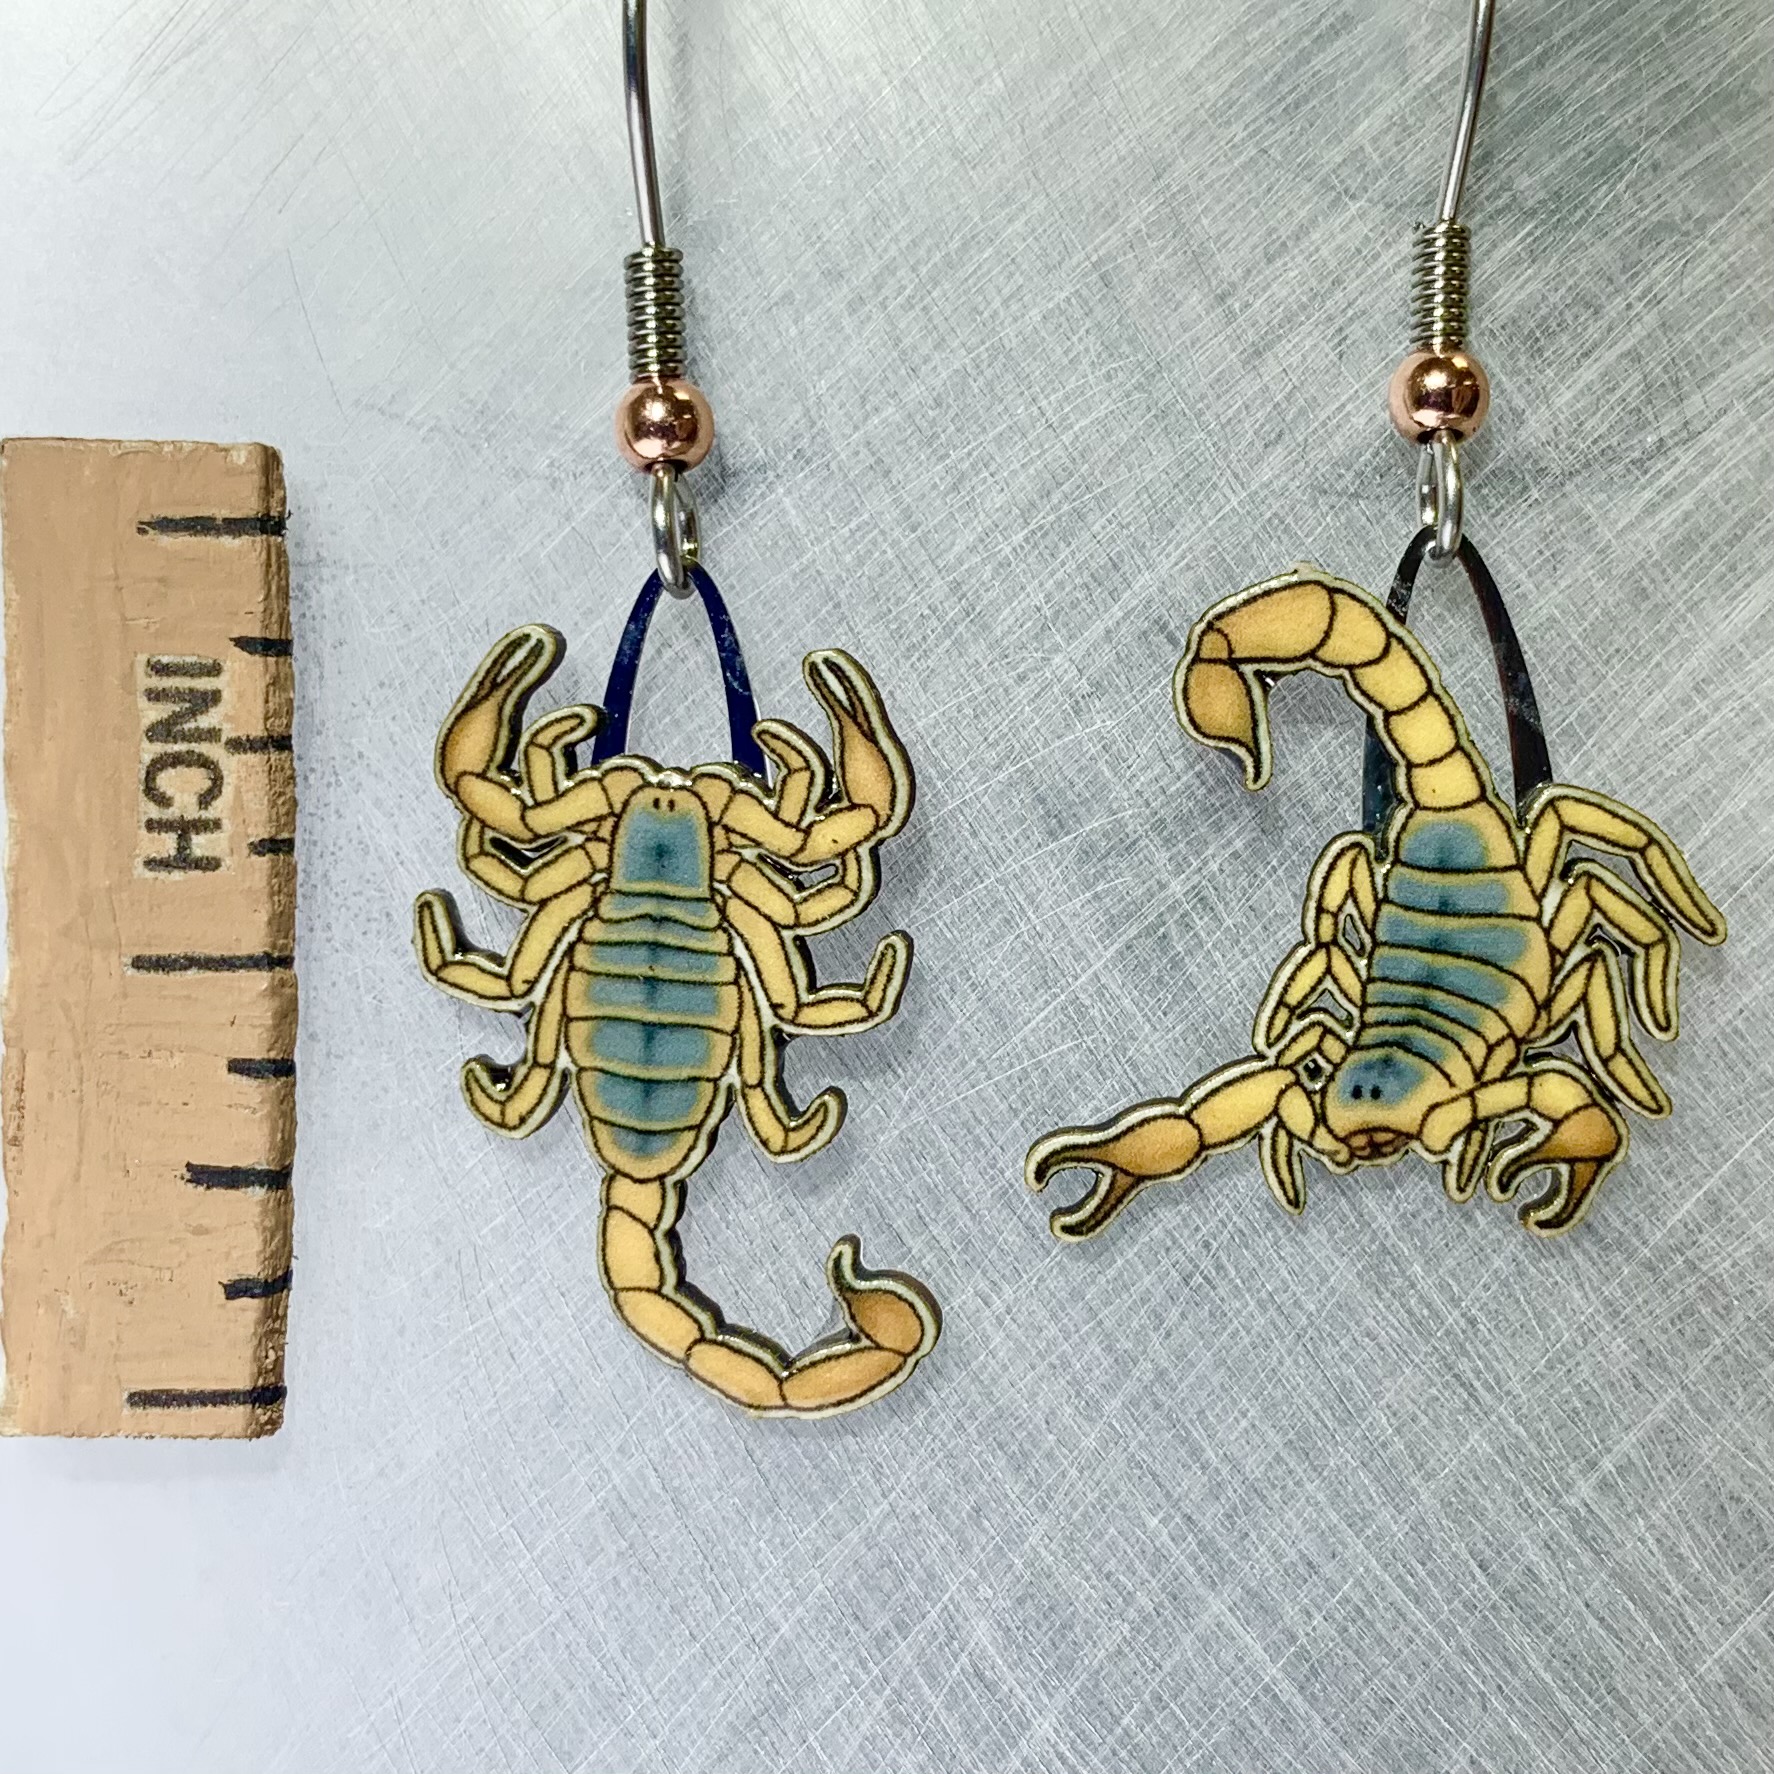 Picture shown is of 1 inch tall pair of earrings of the Scorpion.